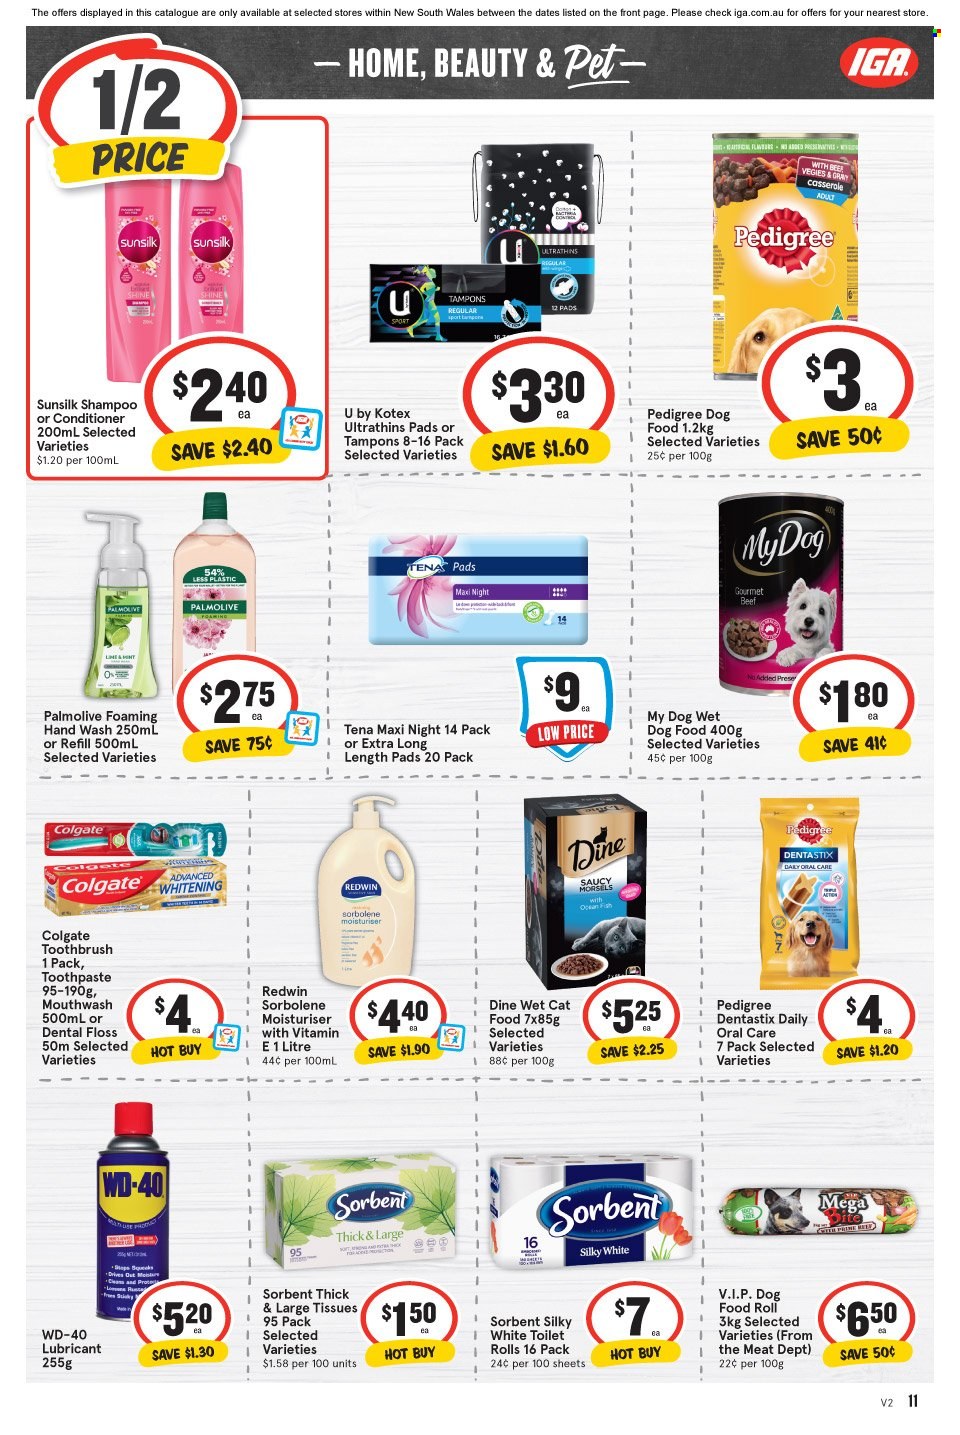 thumbnail - IGA Catalogue - 22 Sep 2021 - 28 Sep 2021 - Sales products - toilet paper, tissues, shampoo, hand wash, Palmolive, Sunsilk, Colgate, toothbrush, toothpaste, mouthwash, Tena Lady, Kotex, tampons, conditioner, lubricant, animal food, cat food, dog food, wet dog food, Dentastix, Pedigree, wet cat food. Page 11.